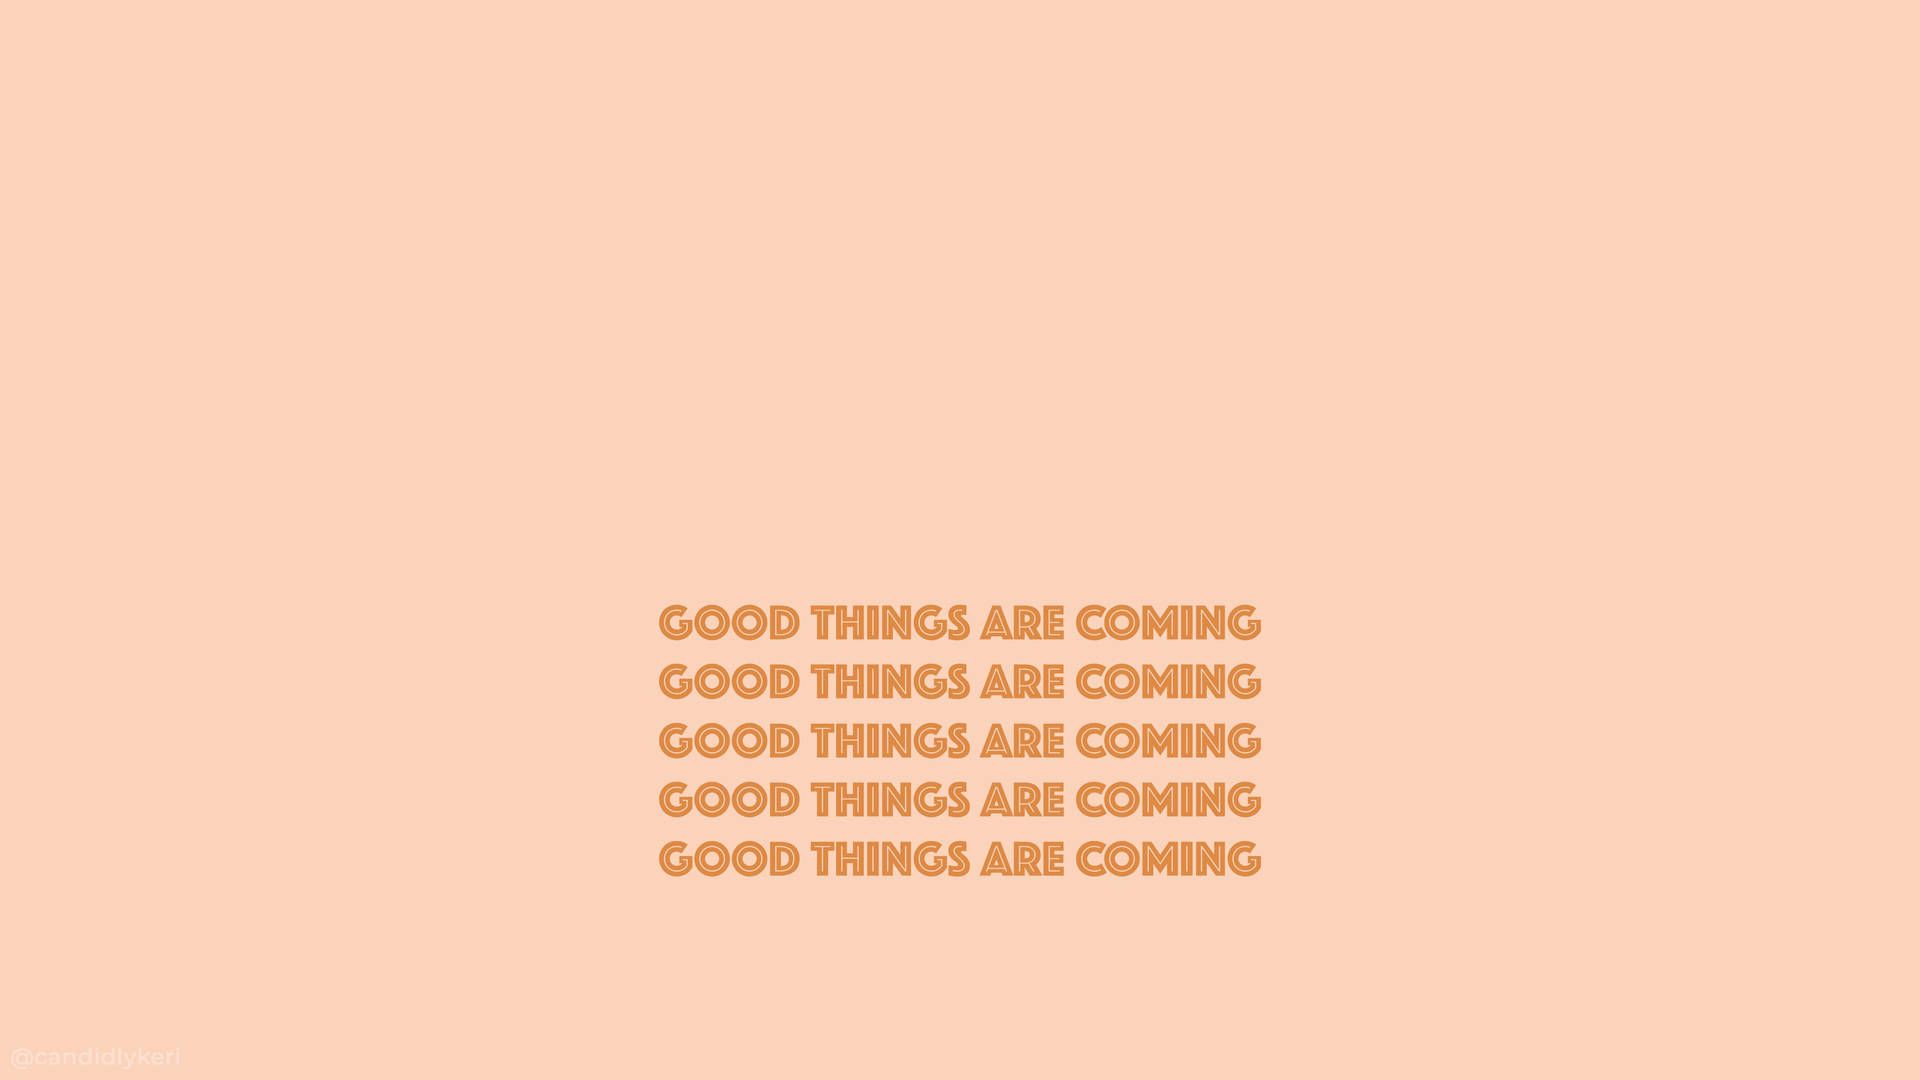 Good things are coming - Peach